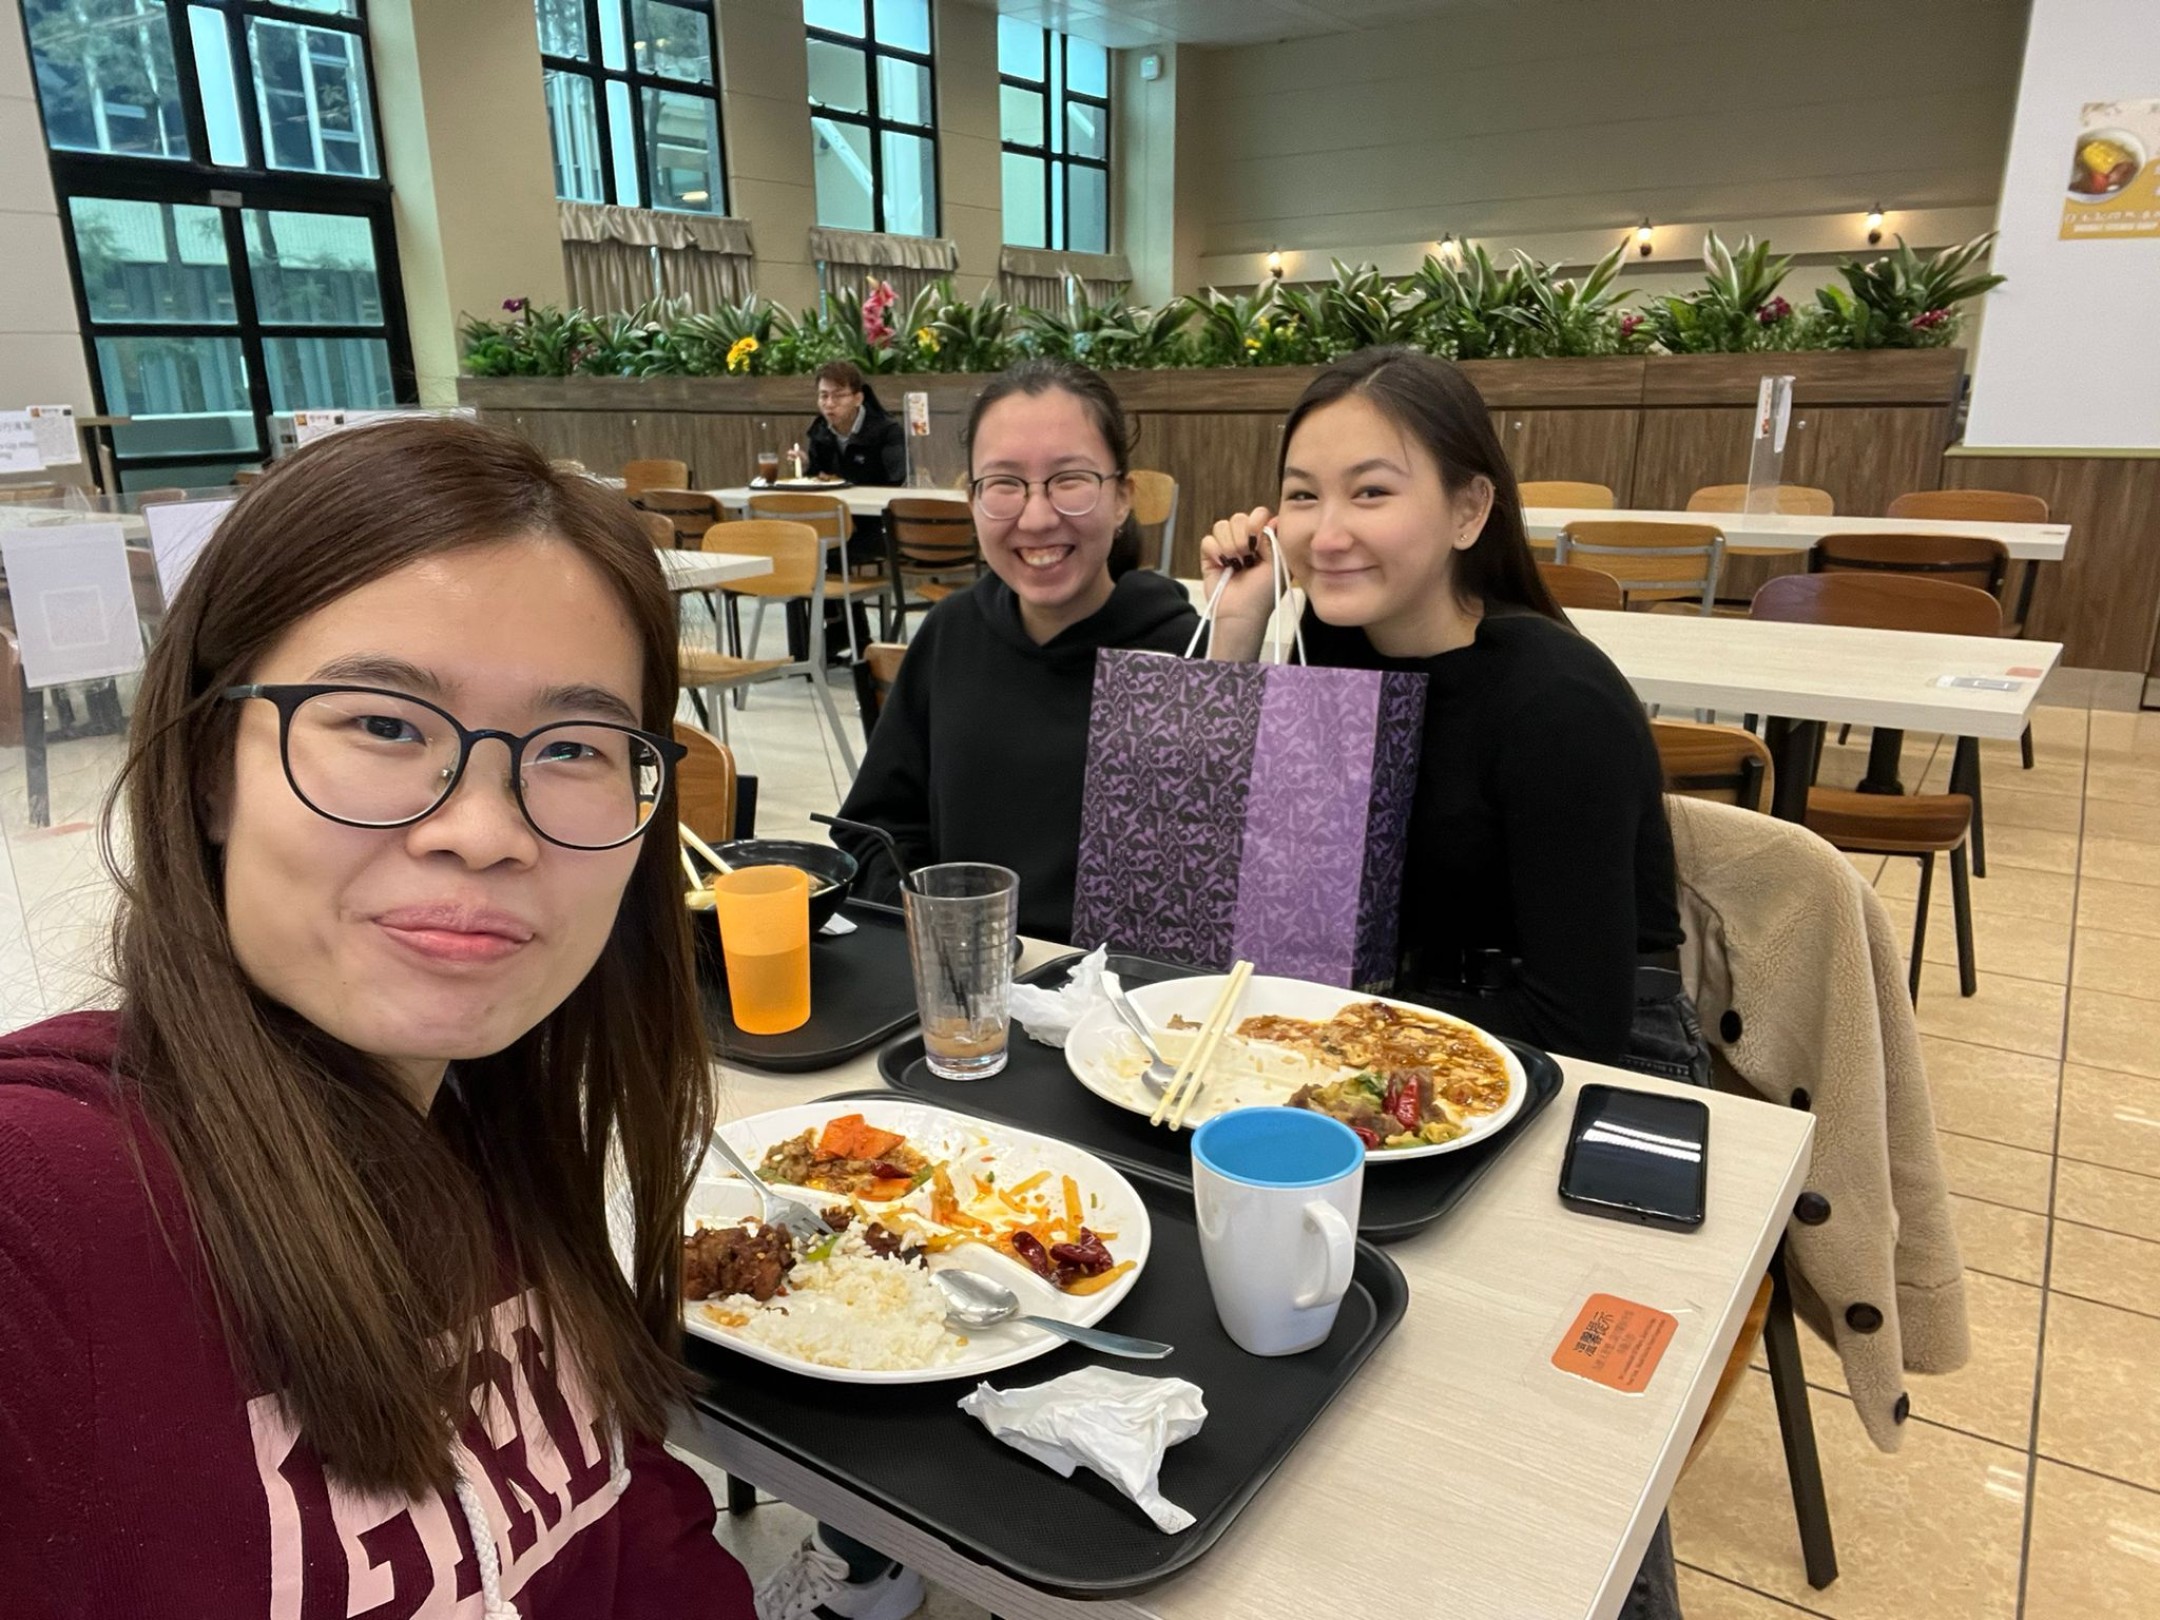 We had a nice meal gathering before the Chinese New Year. I shared with my two host daughters about the traditional customs like going to flower market and visiting relatives at CNY